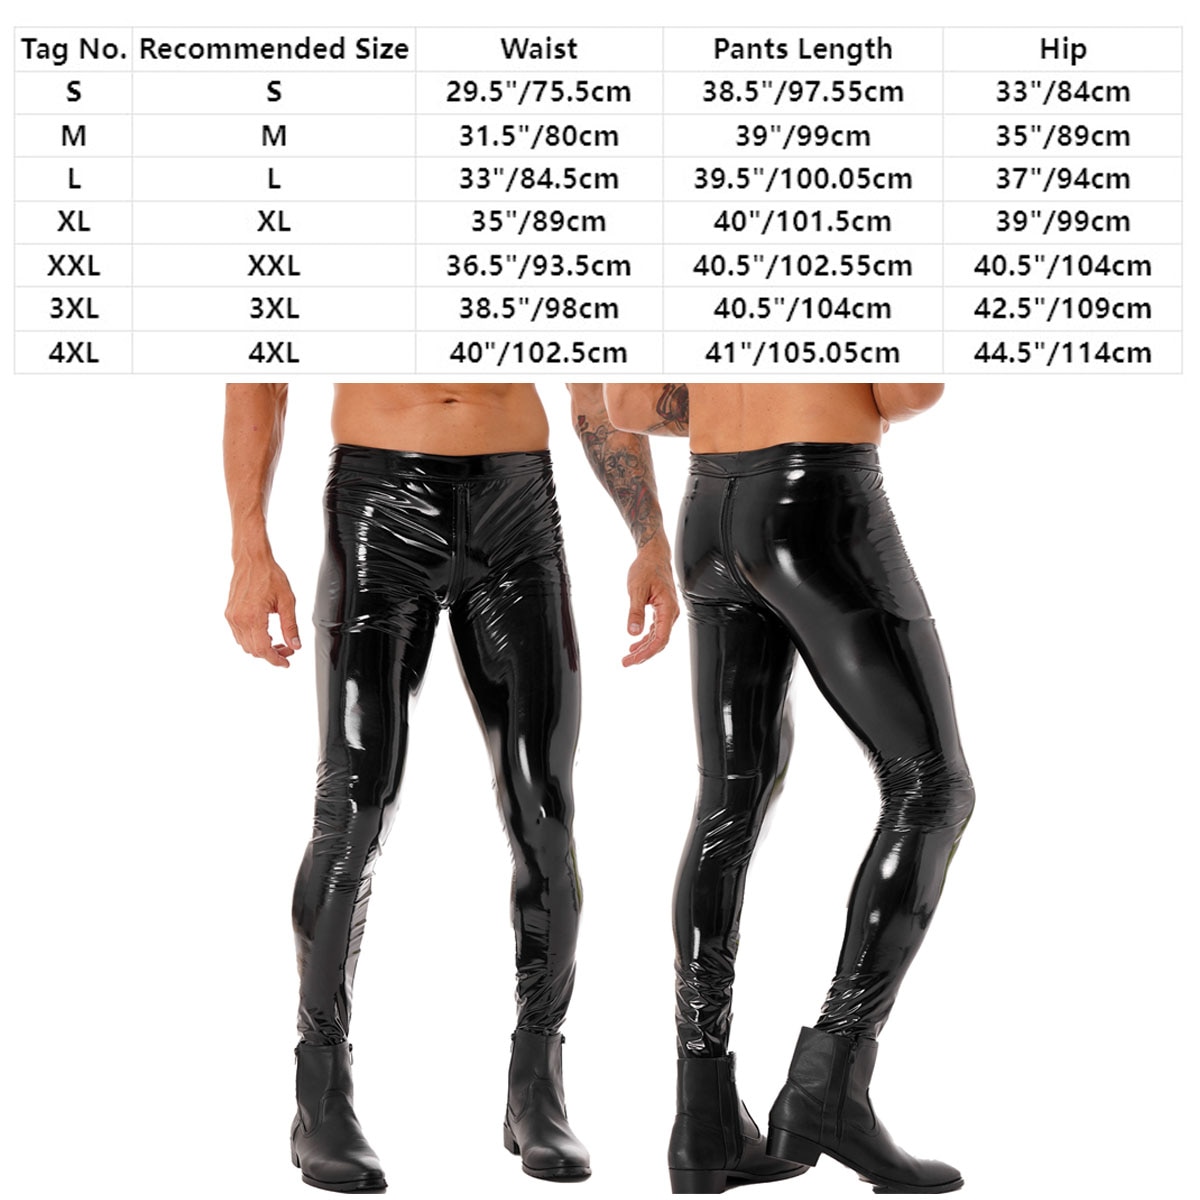 Mens-Faux-Leather-Pants-Black-Punk-Gothic-Wet-Look-Motor-Biker-Tights-Trousers-Stretch-Club-Stage-5.jpg